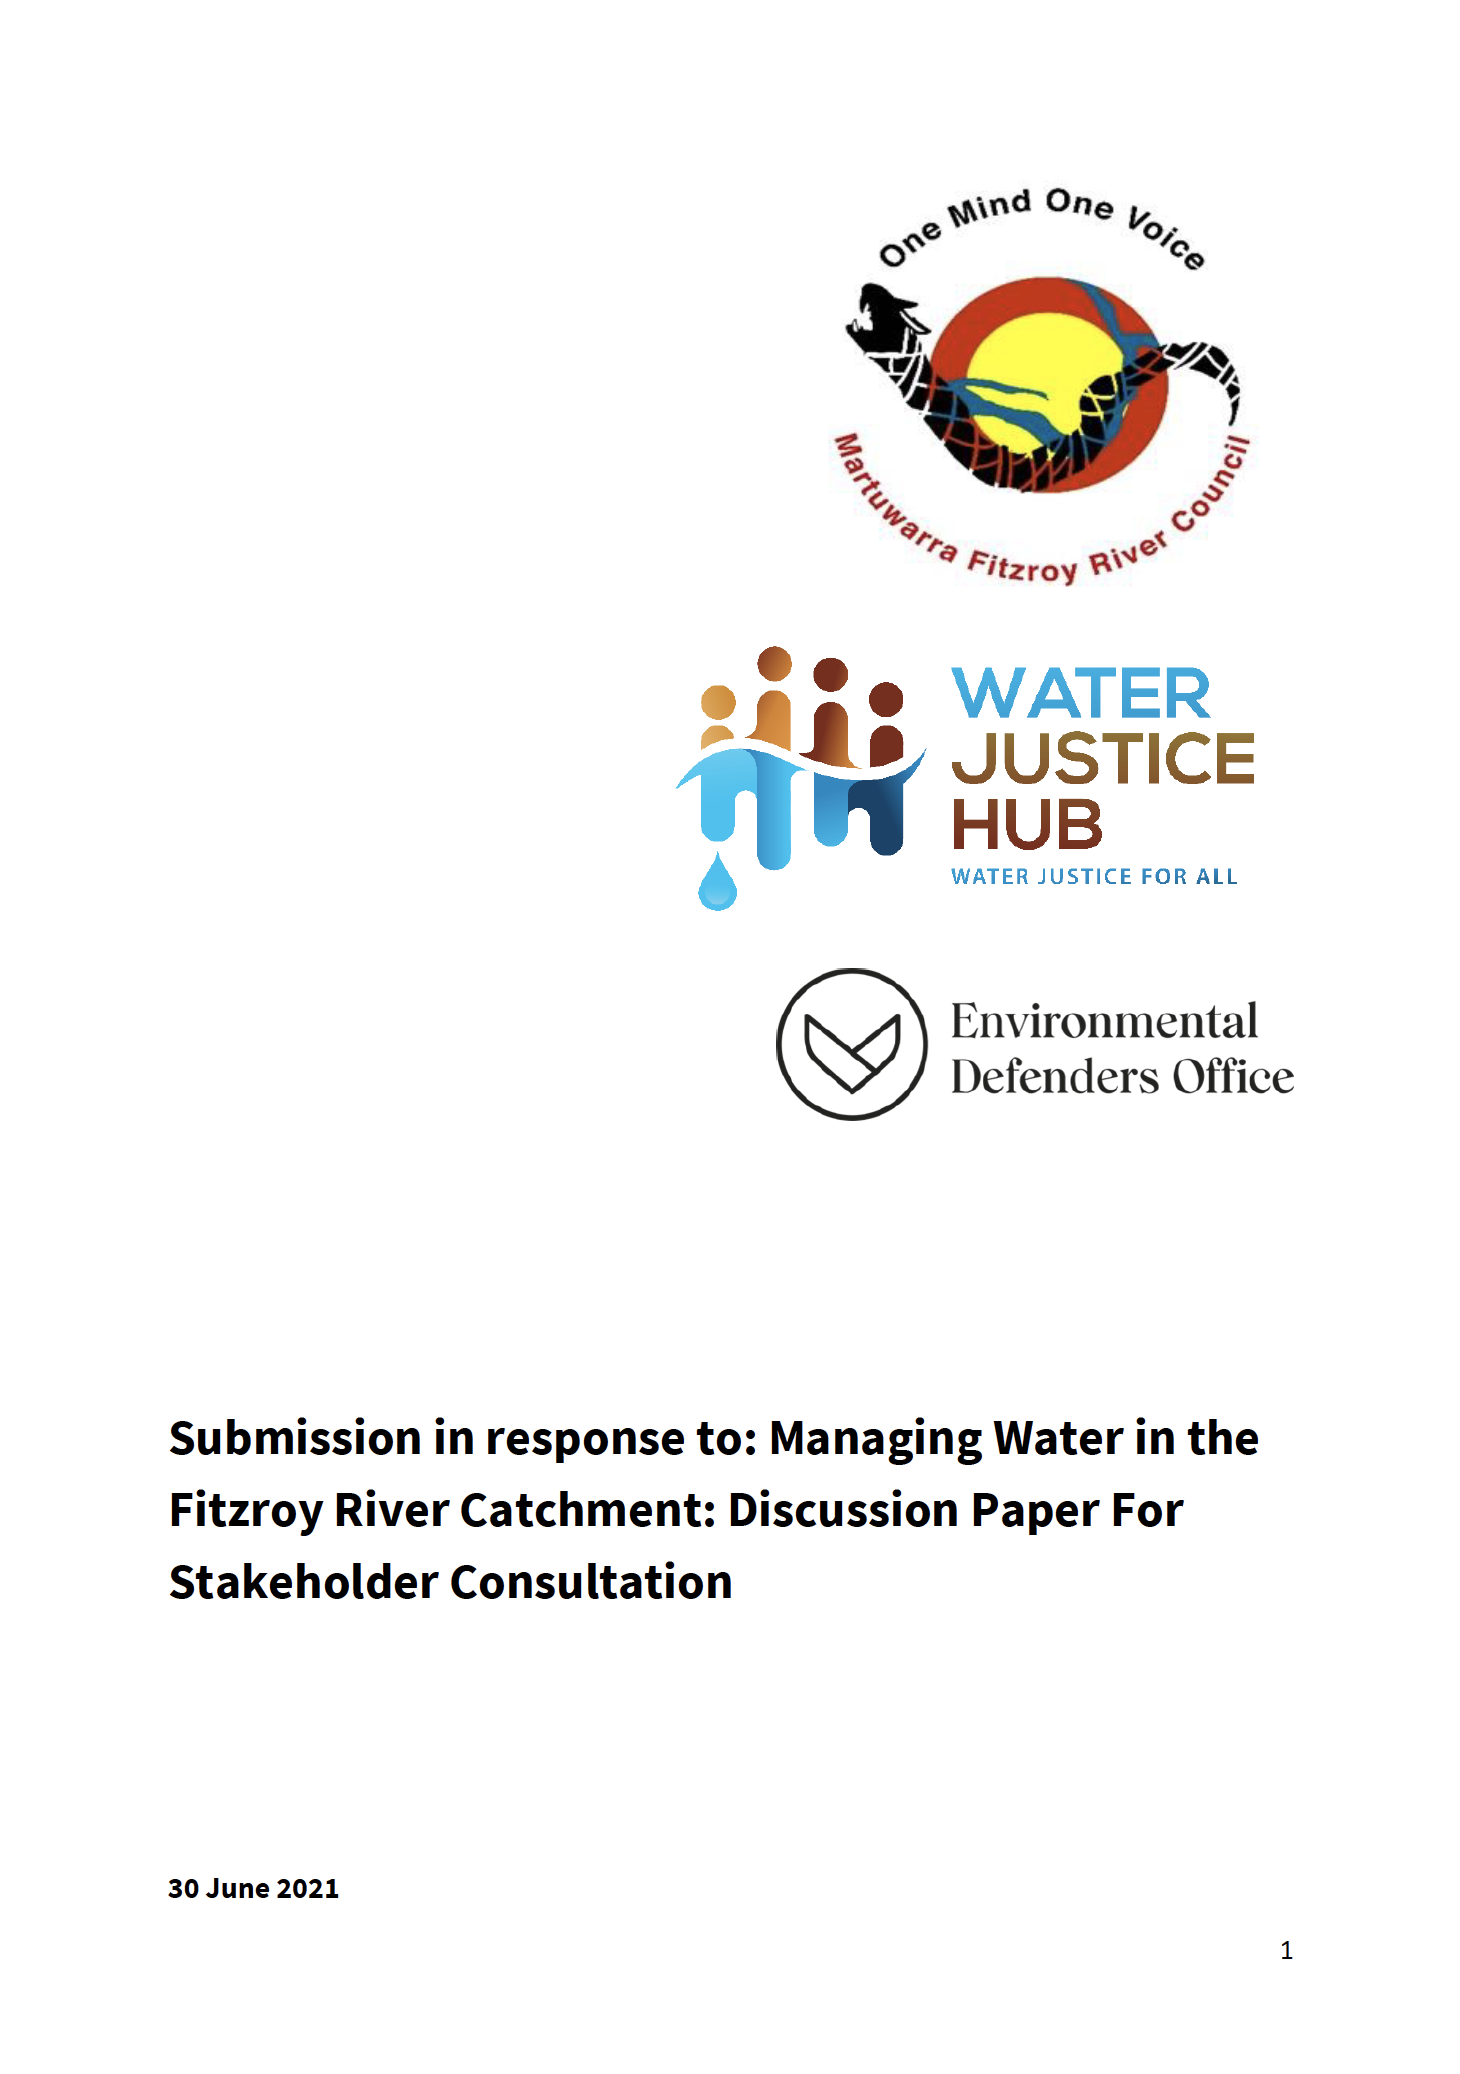 Download the PDF here - Martuwarra Fitzroy River Council has partnered with the Environmental Defenders Office and the ANU Water Justice Hub. Read our submission to the WA Government in response to the Managing Water in the Fitzroy River Catchment: Discussion Paper for Stakeholder Consultation.Citation RiverOfLife, M., Poelina, A., Butterly, L., Carmody, E., Perdrisat, M., Taylor, K., Manero, A., Grafton, Q., Williams, J. (2021) Submission in response to: Managing Water in the Fitzroy River Catchment: Discussion Paper For Stakeholder Consultation. DOI: 10.6084/m9.figshare.15088404